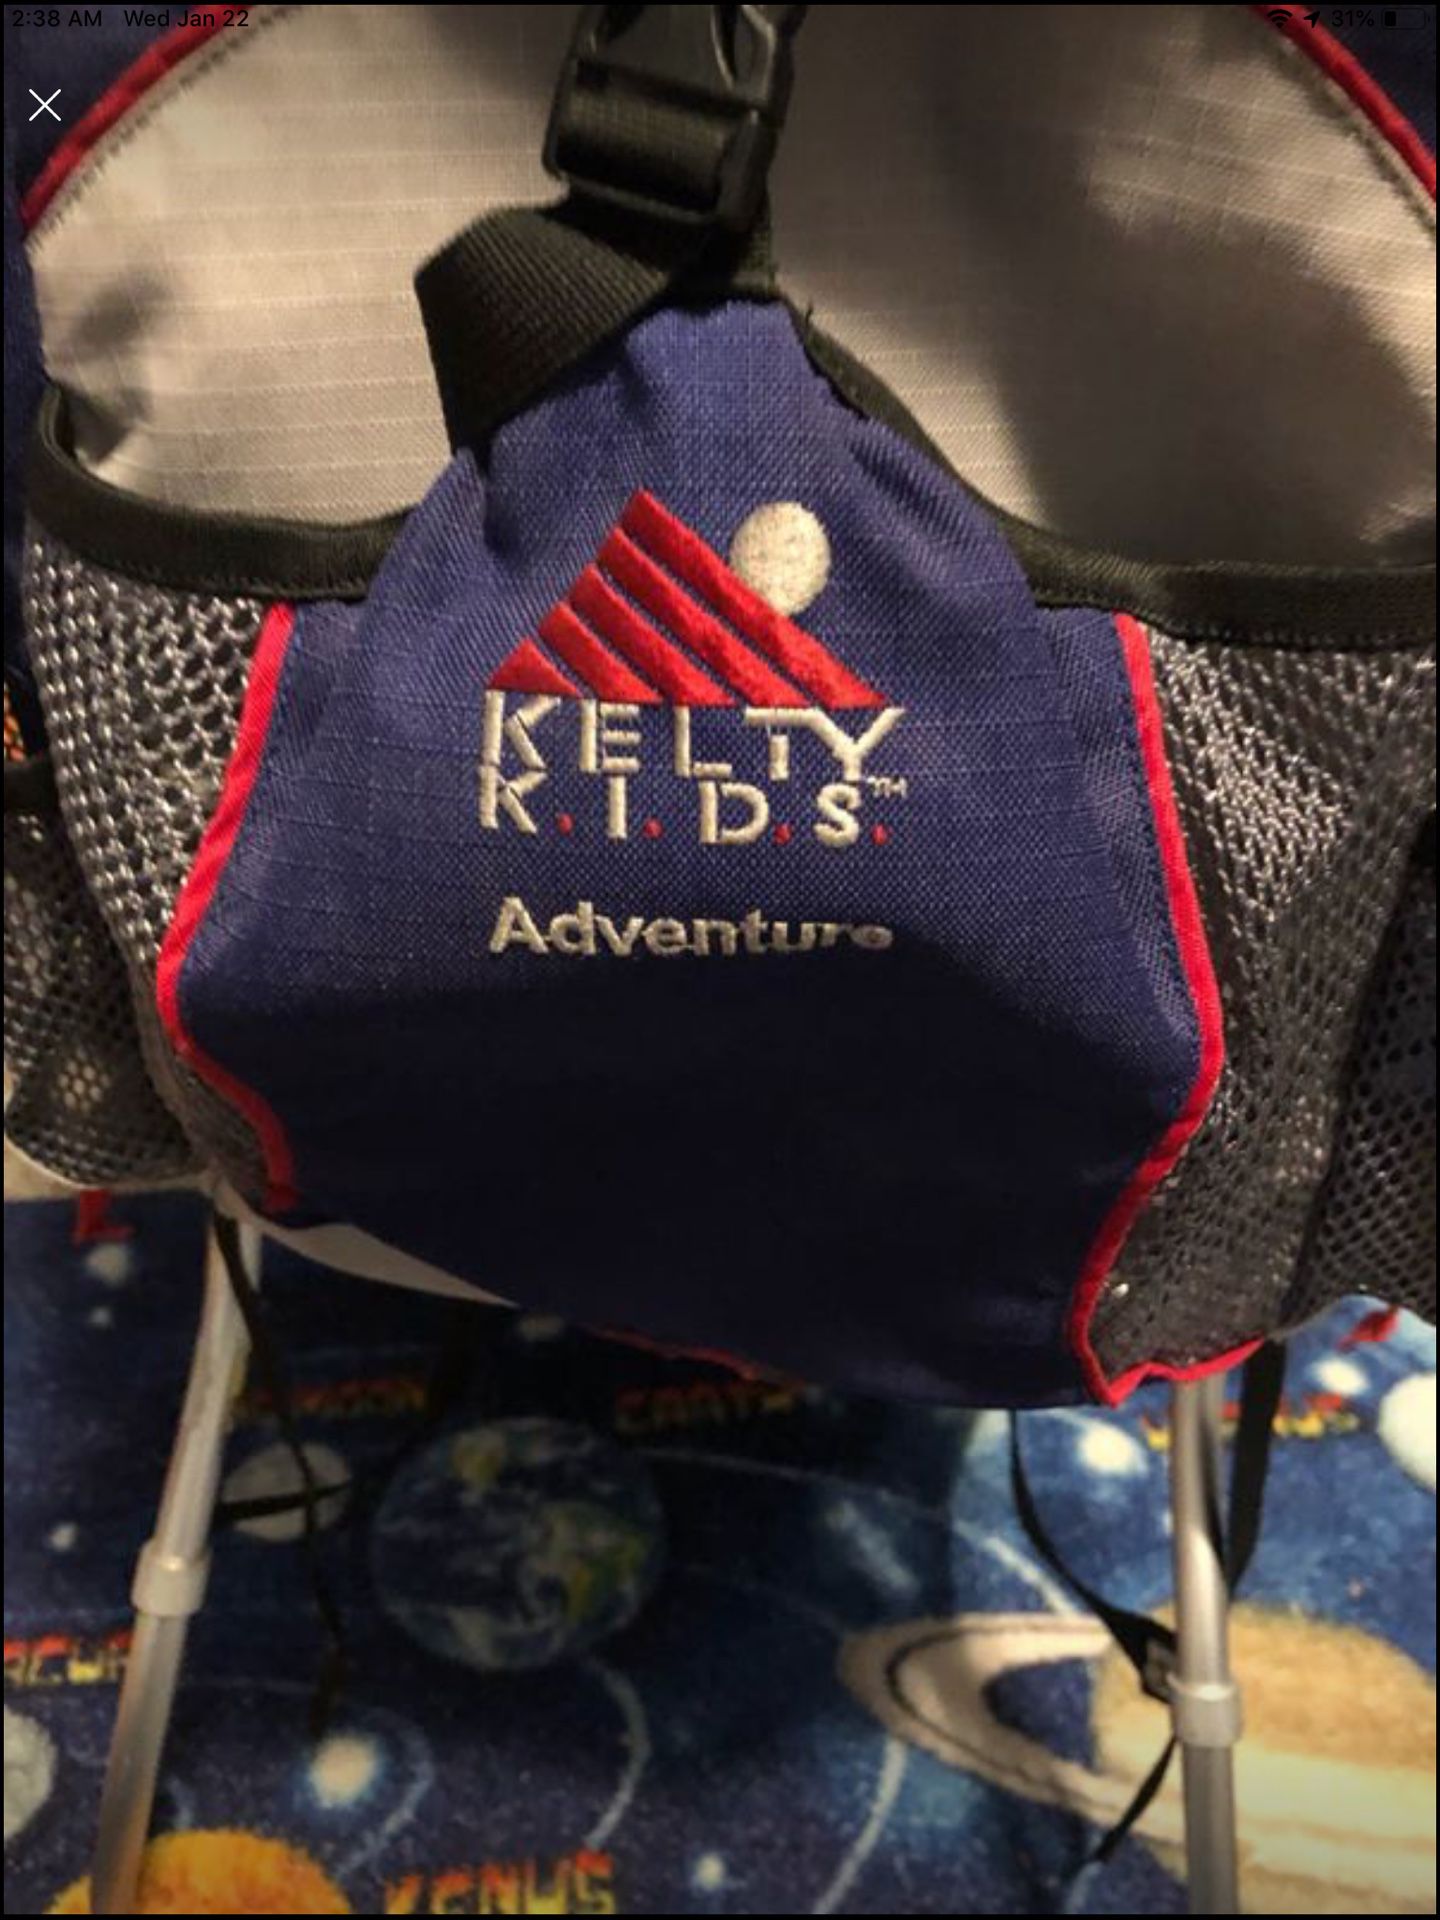 Kelty Backpack baby Carrier